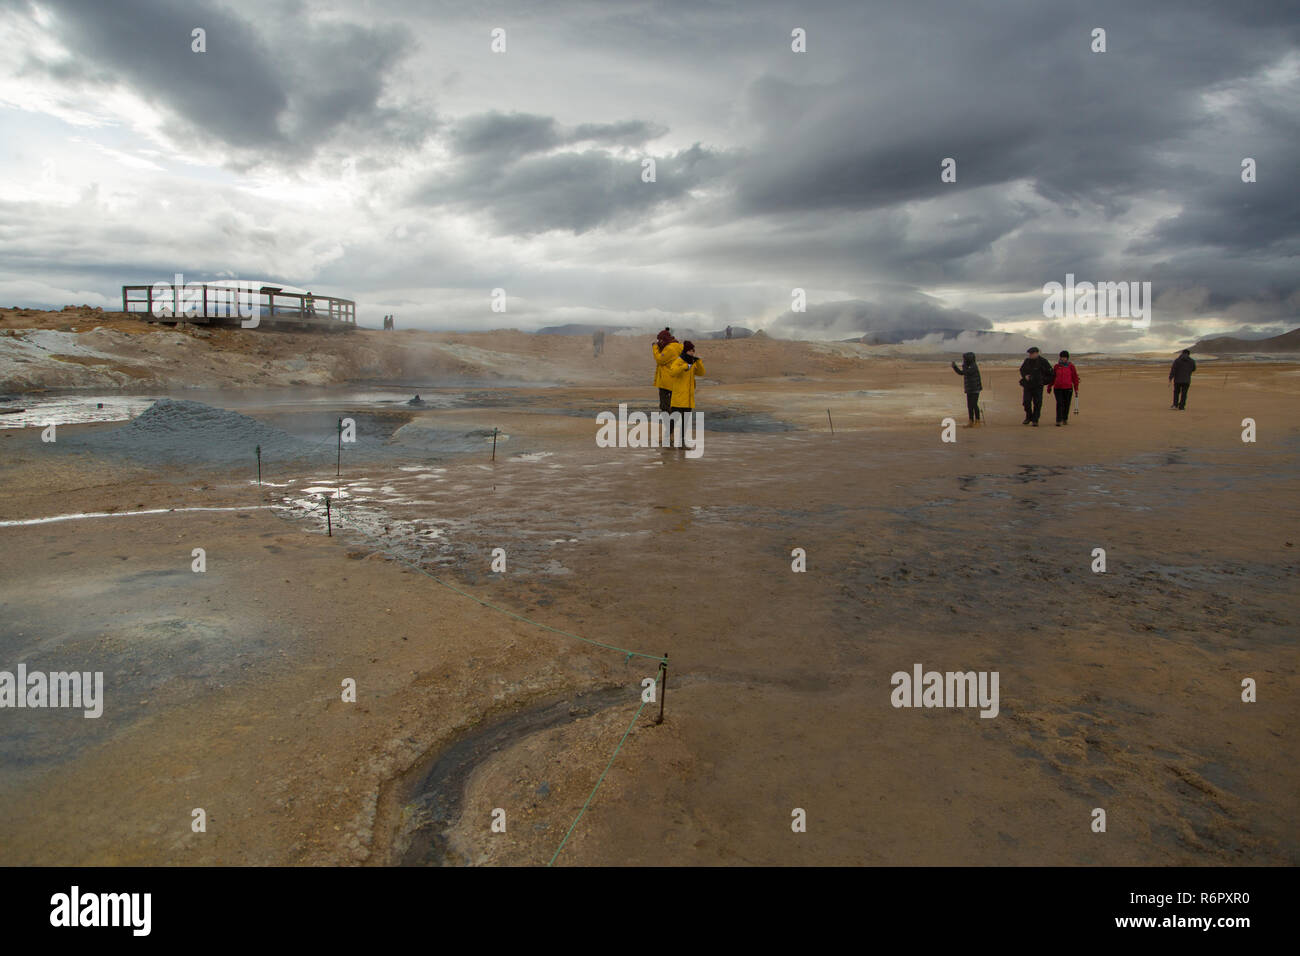 Tourists walk round looking at the geothermal area at Hverir, Namafjall, Iceland Stock Photo